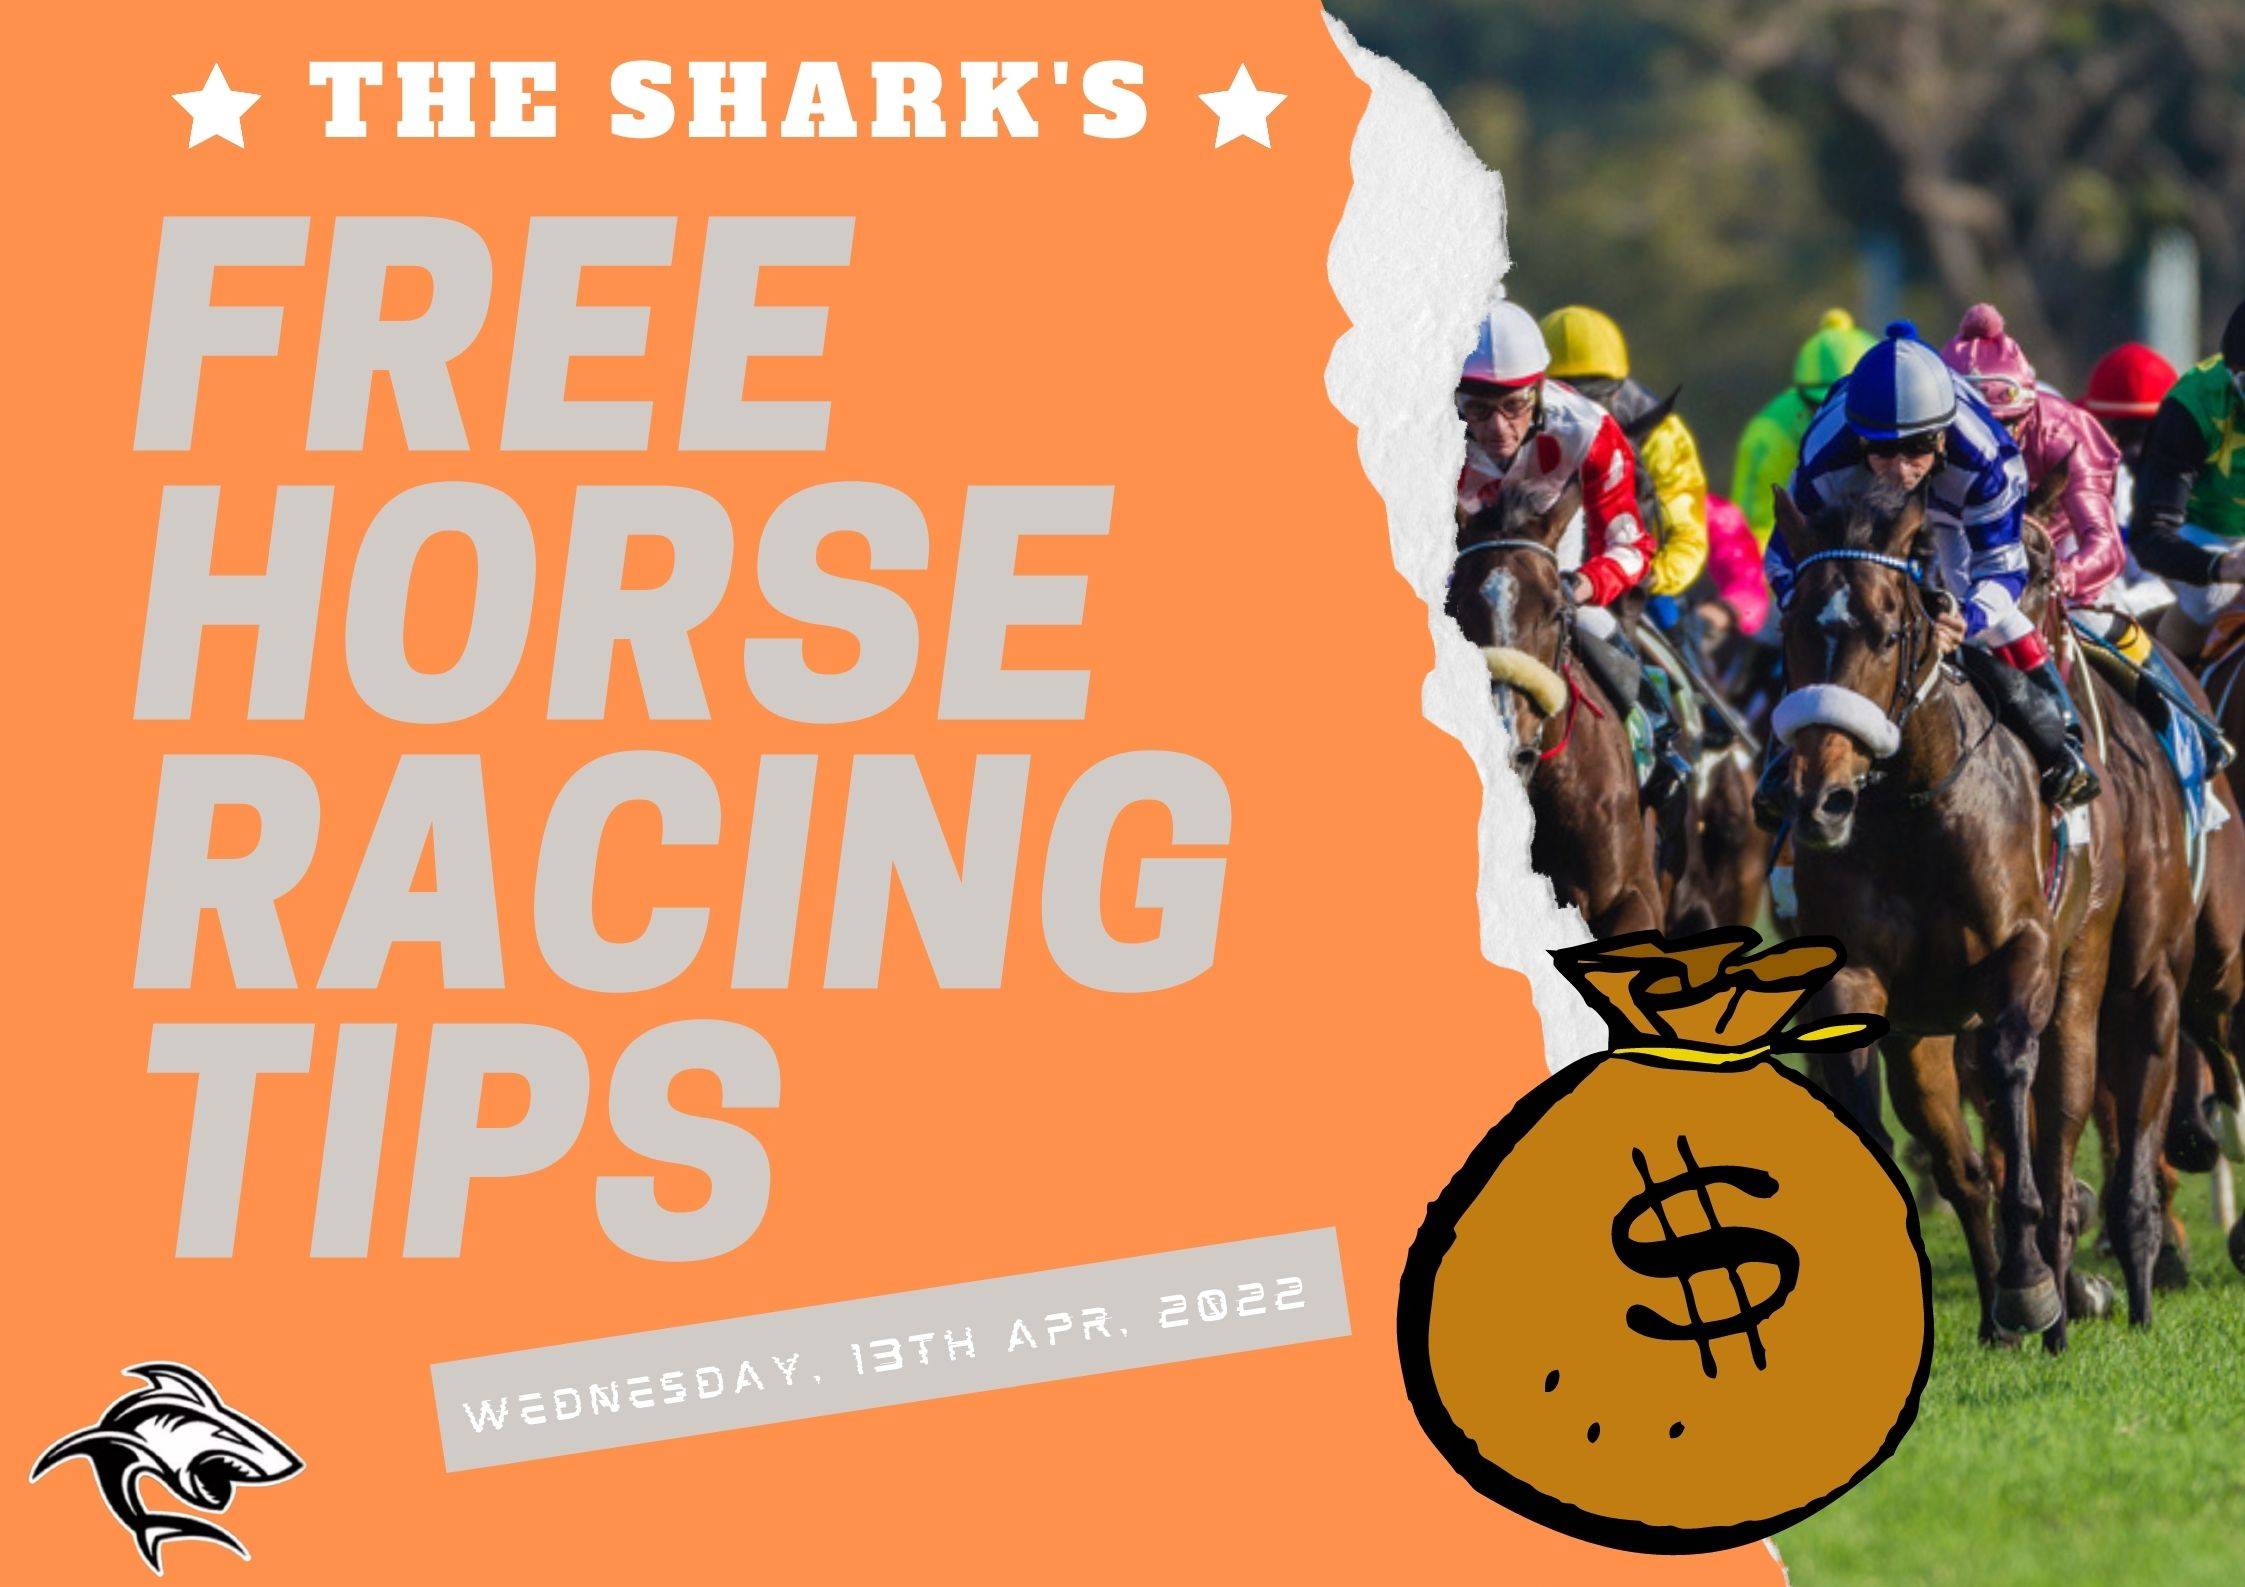 Free Horse Racing Tips - 13th Apr